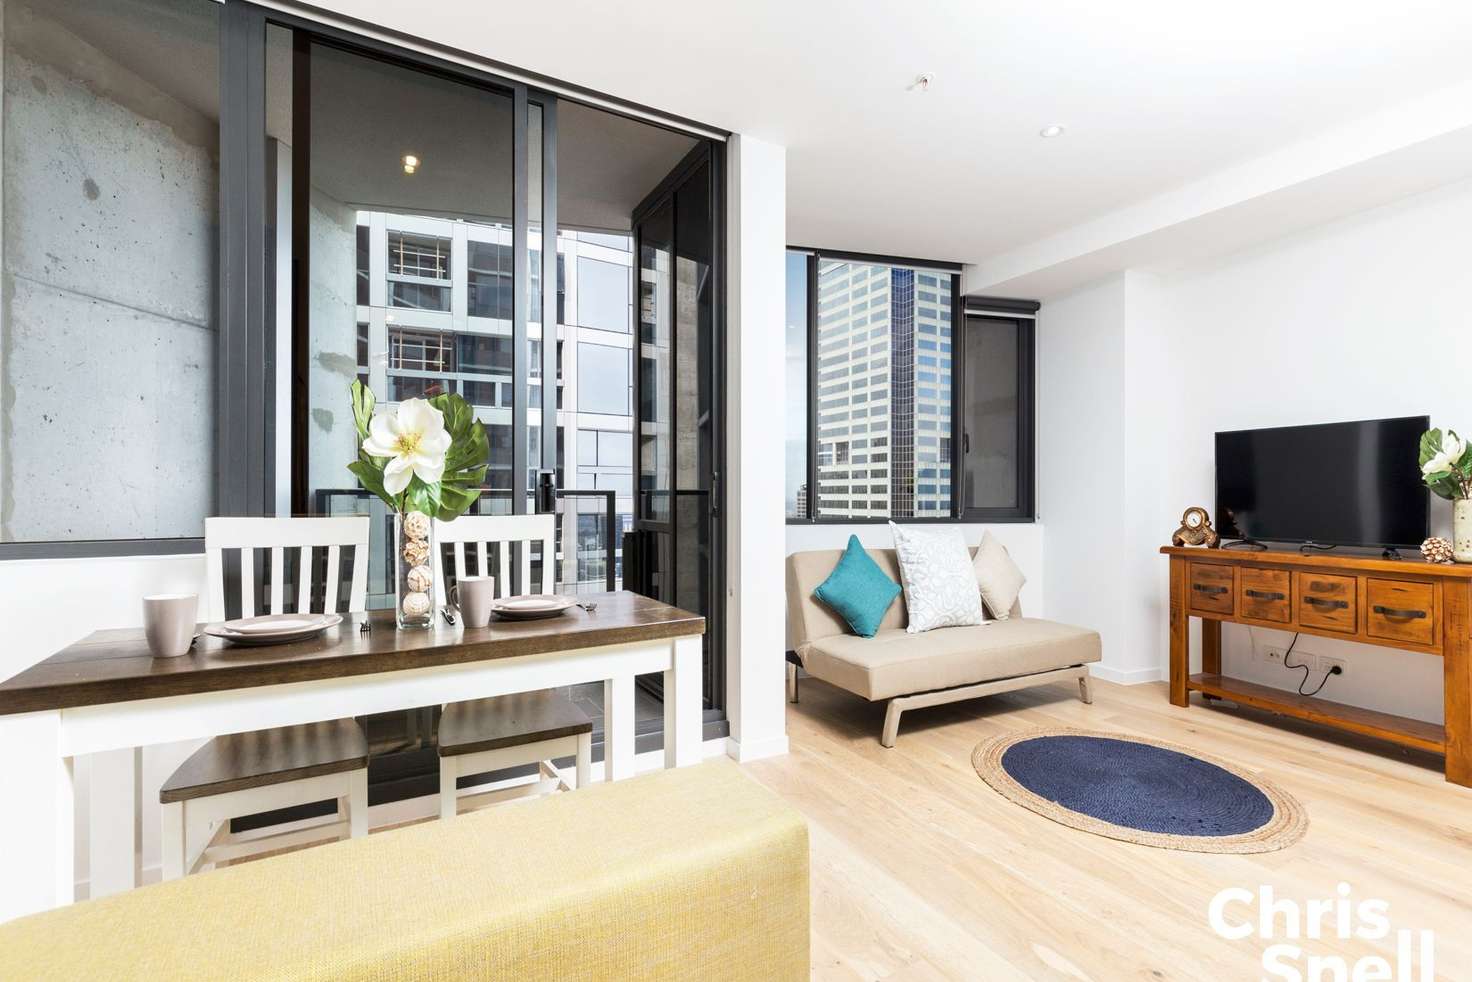 Main view of Homely apartment listing, 4501/33 Rose Lane, Melbourne VIC 3000